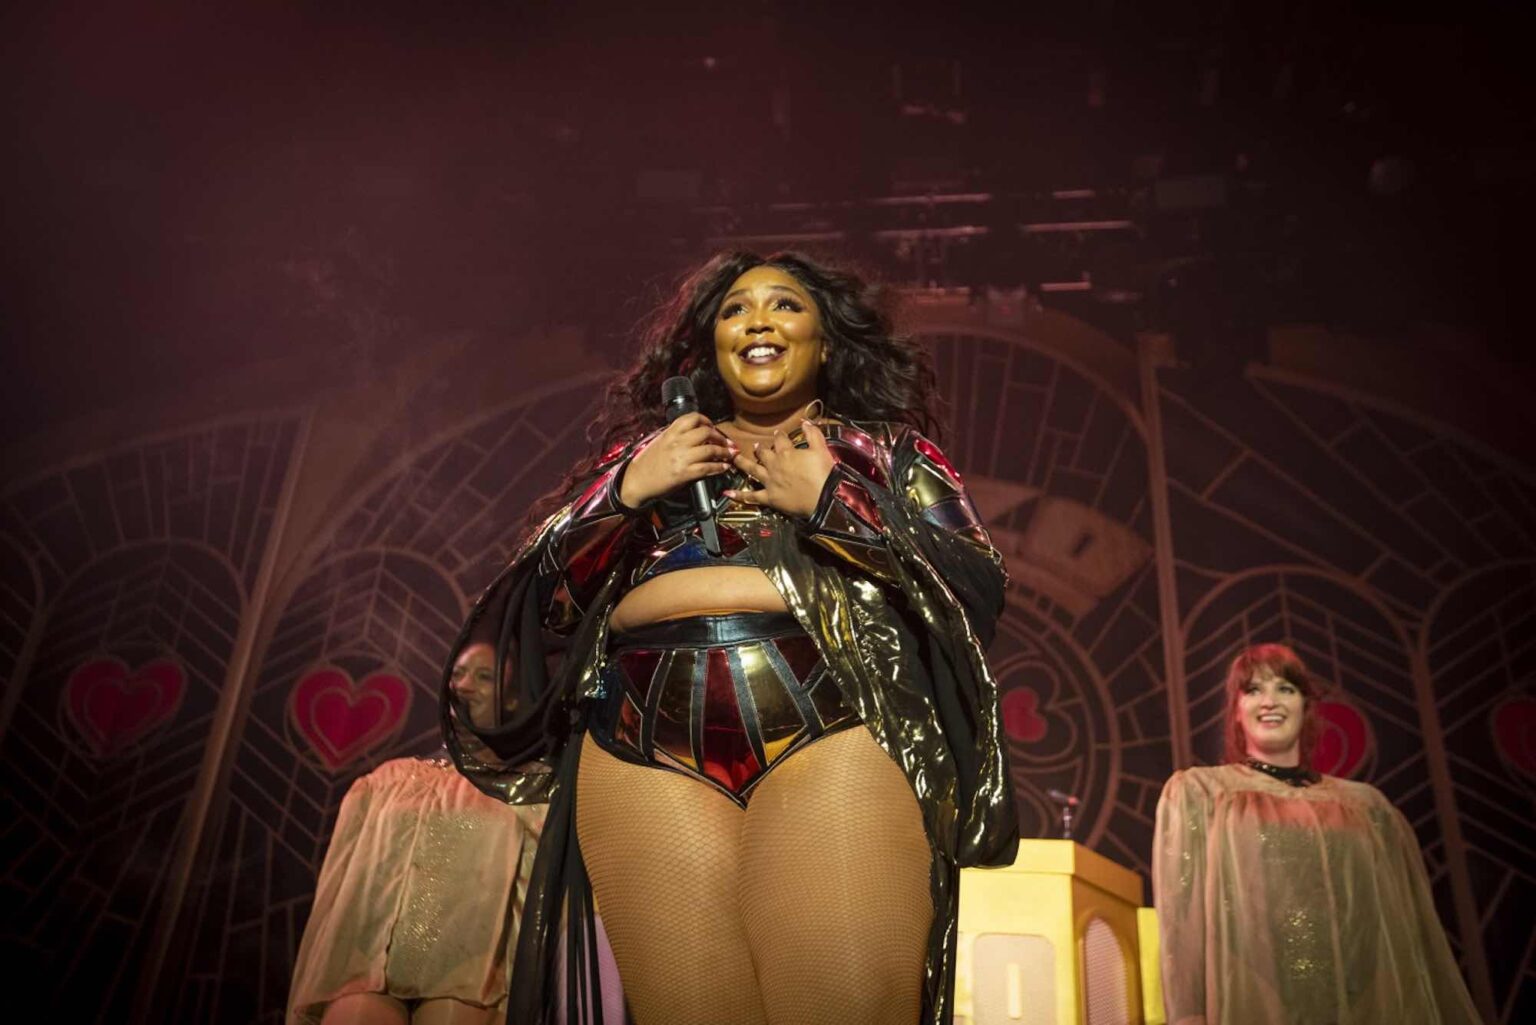 The Internet has rallied around Lizzo after she's been slammed by fatphobic comments. So let's laugh at some memes instead of engaging with those losers.